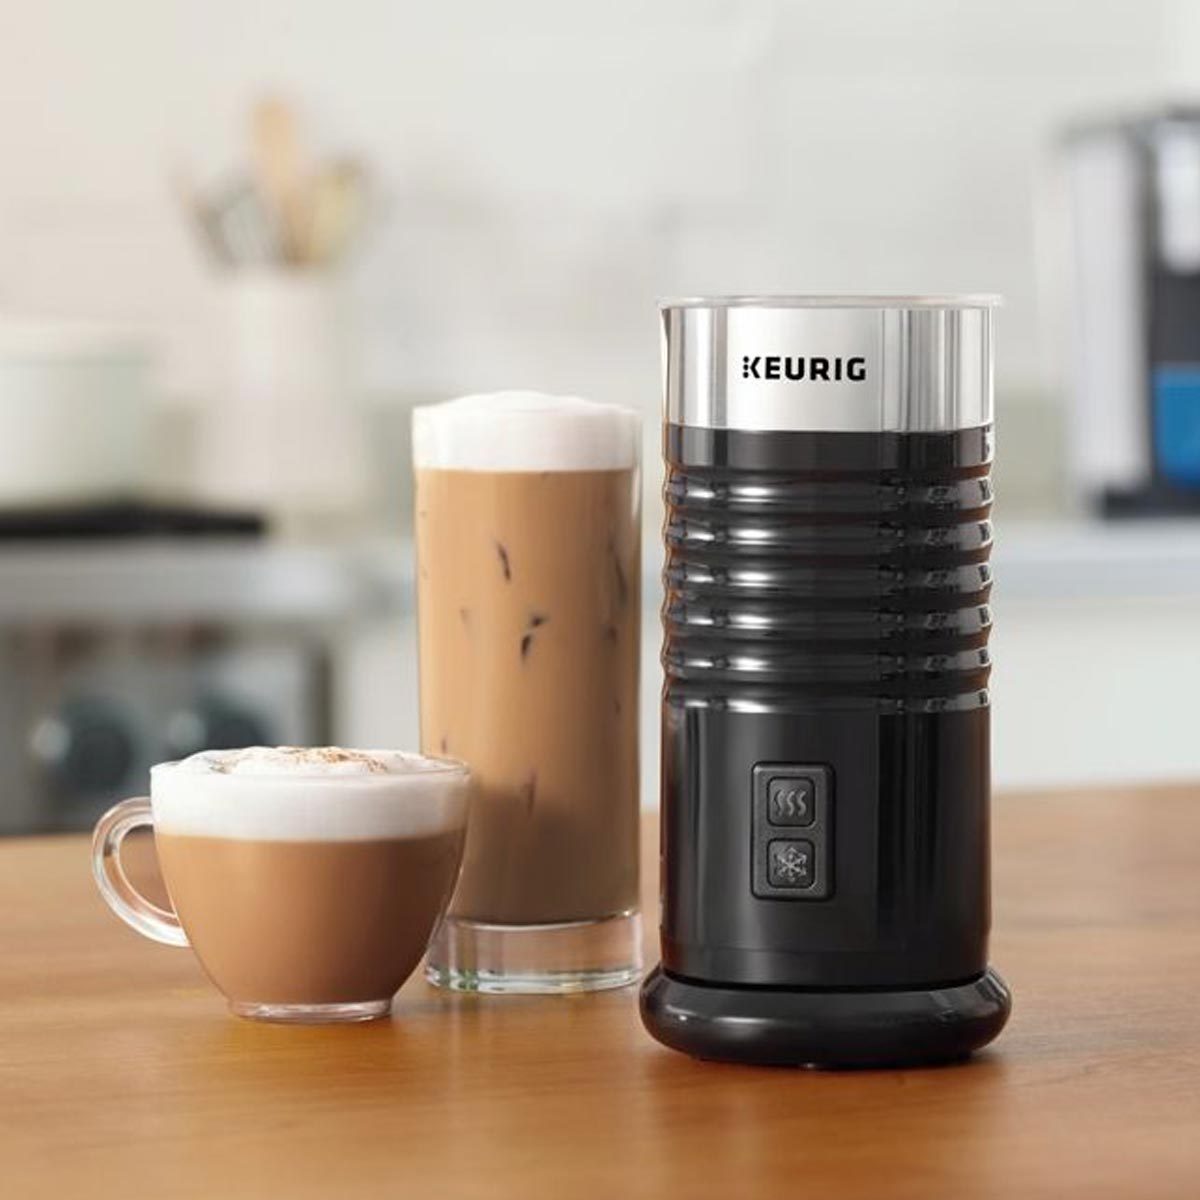 Keurig One Touch Milk Frother Review - The Gadgeteer